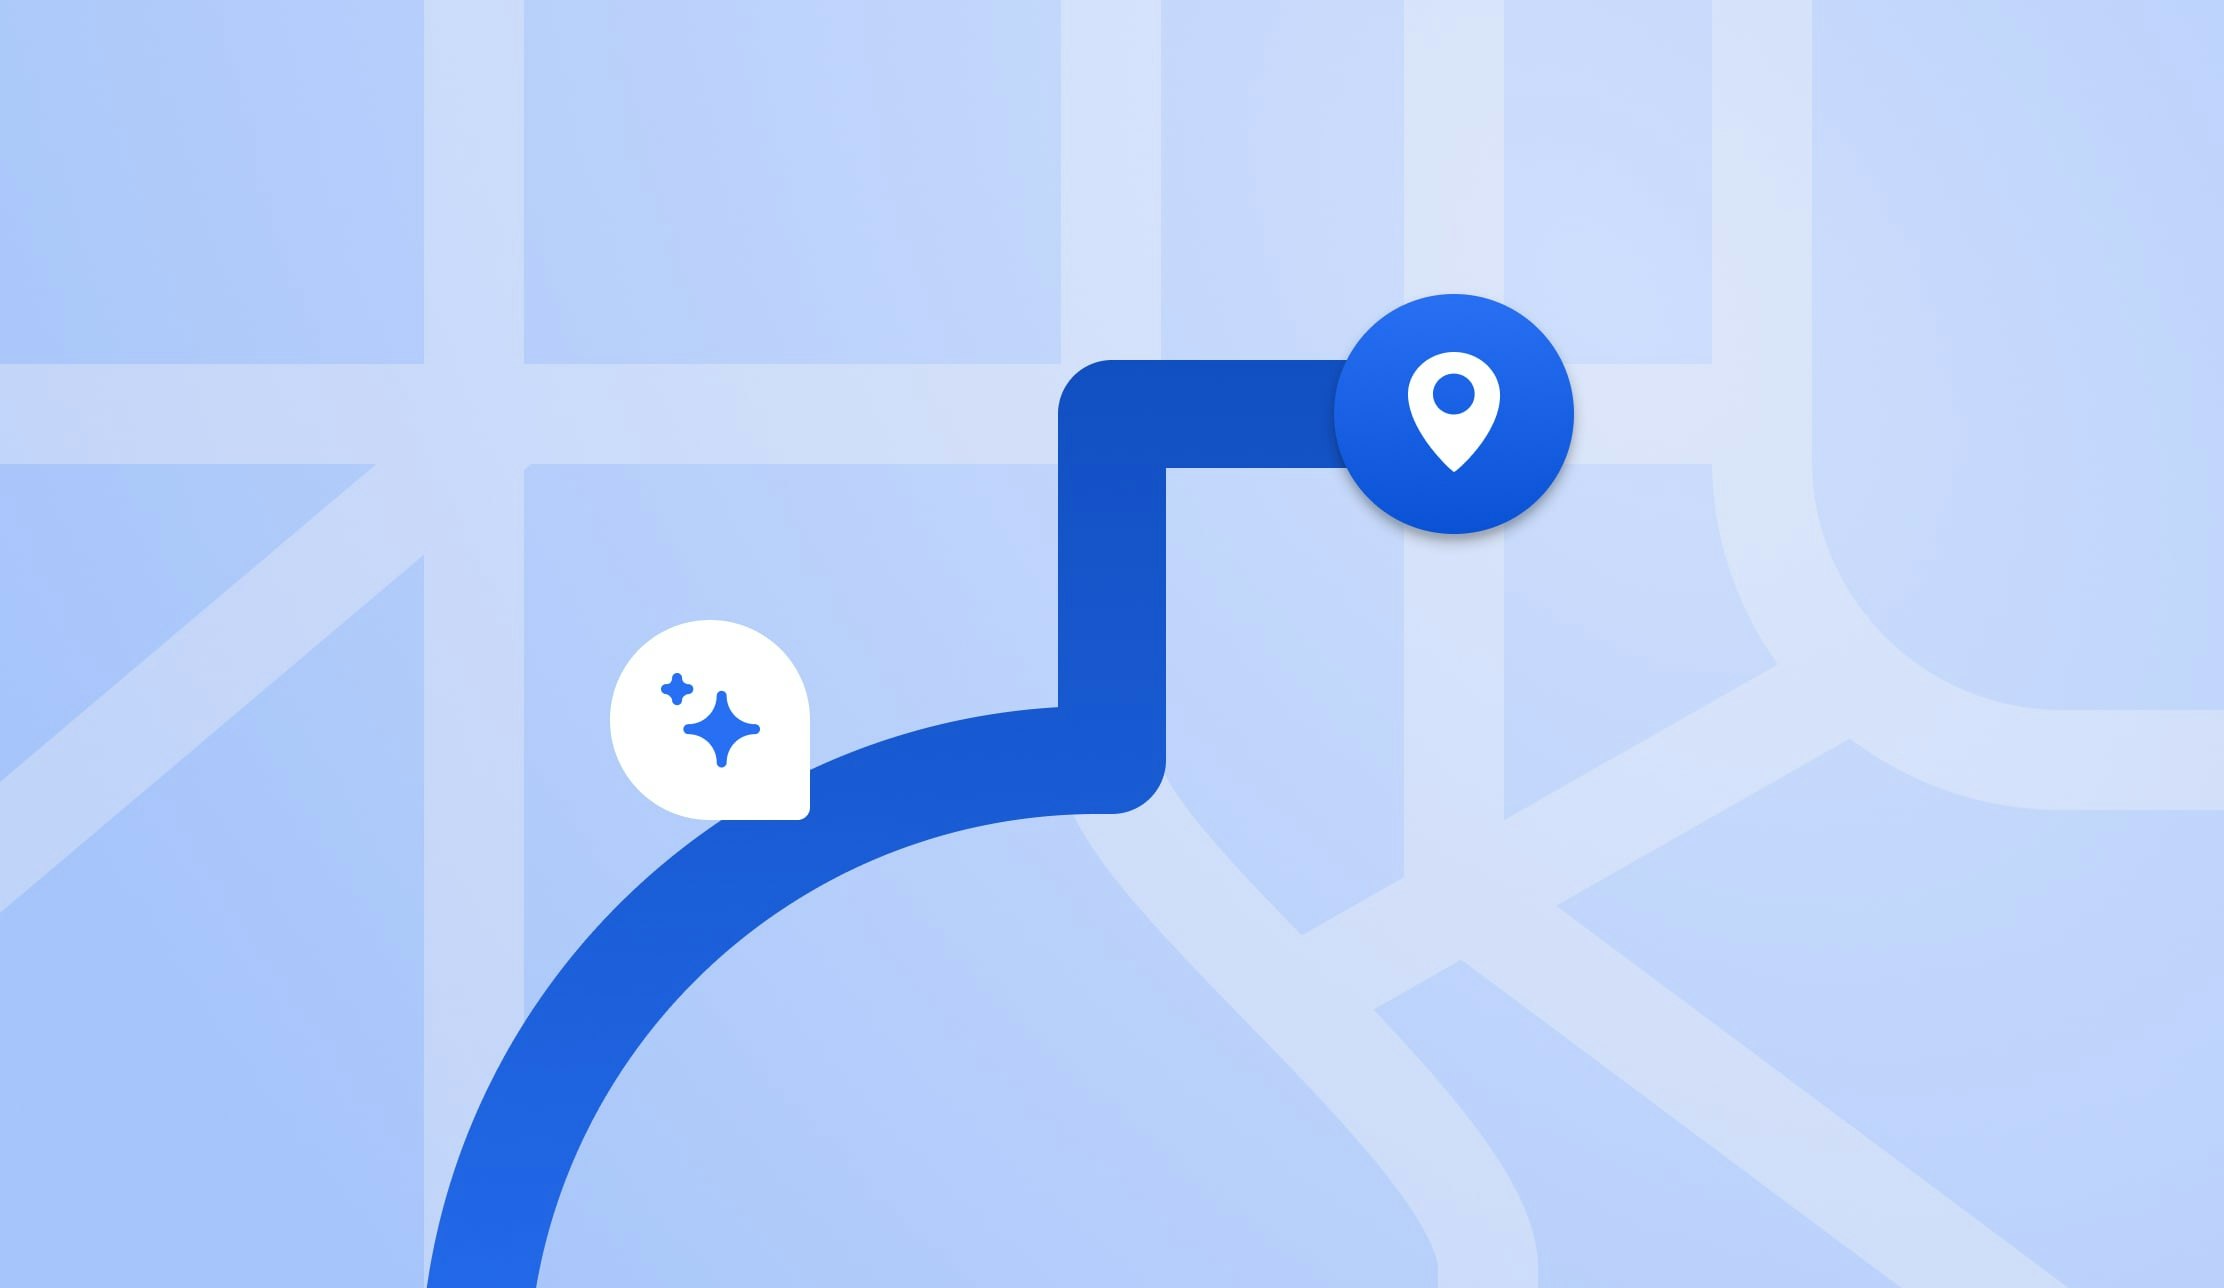 Animated GPS map with destination icons